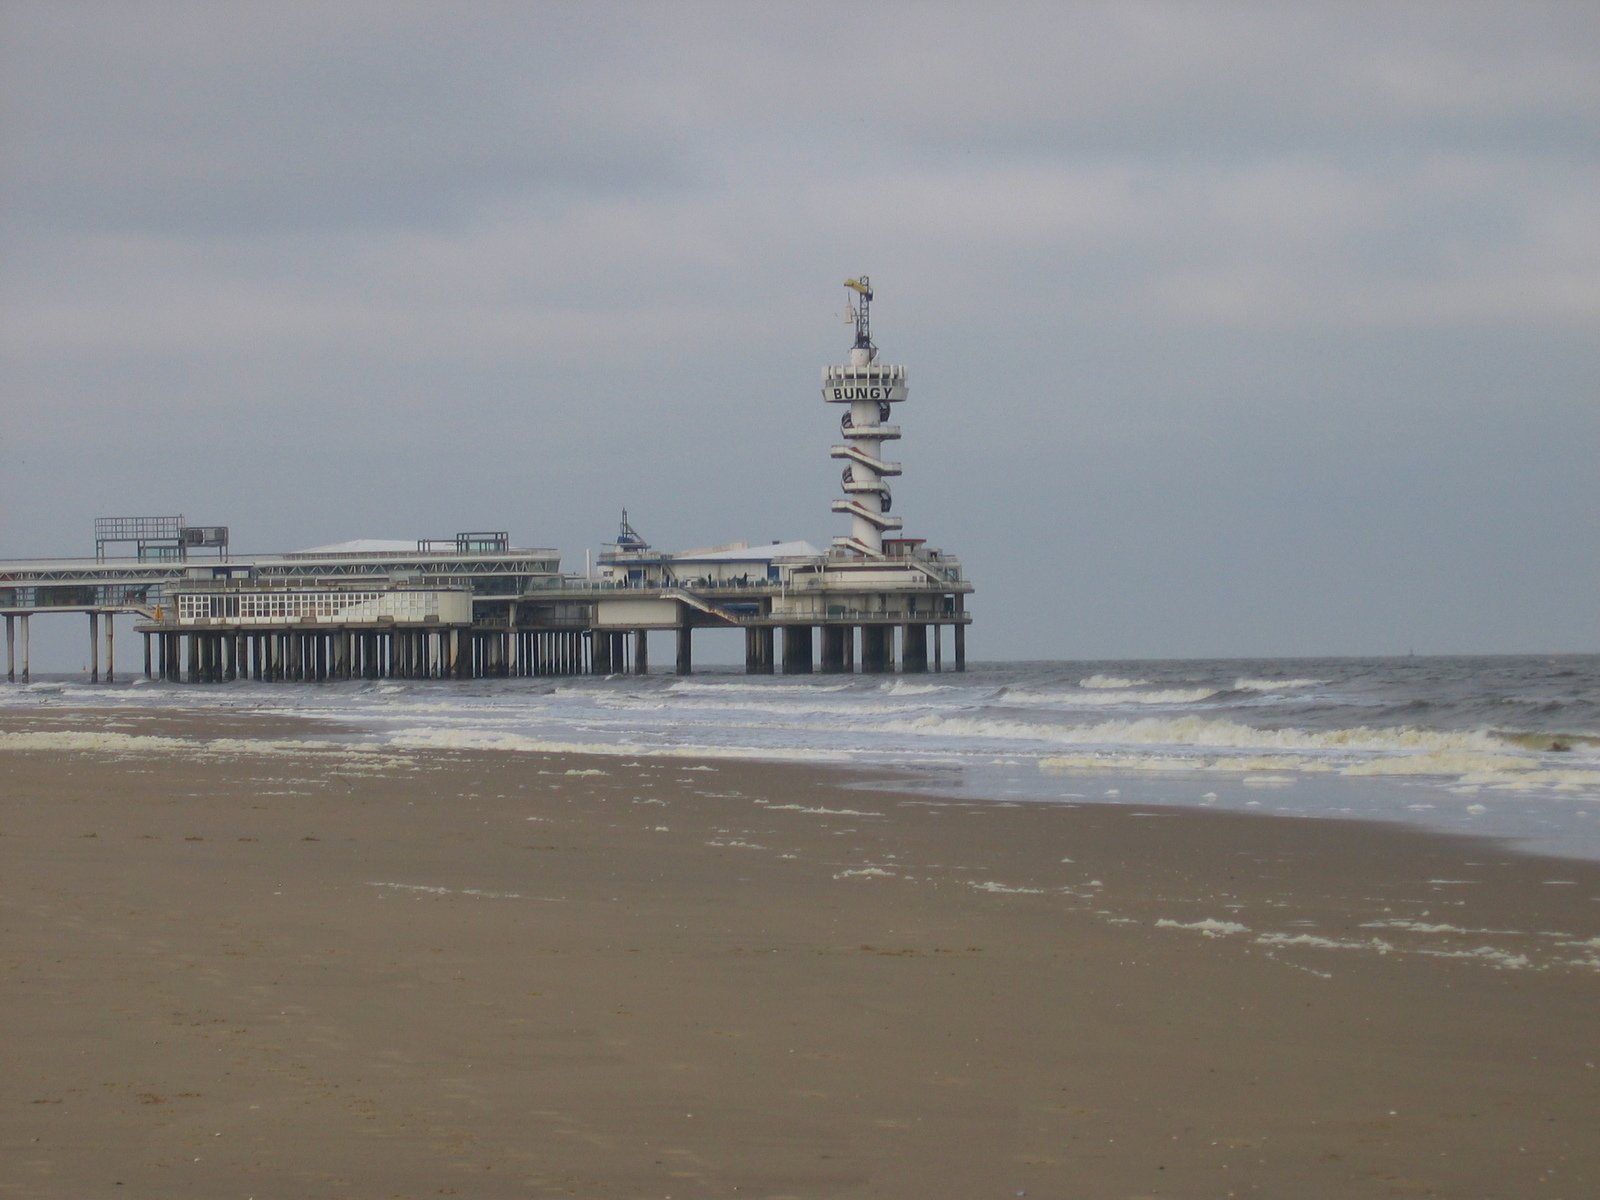 a pier with a clock tower in the background and water waves